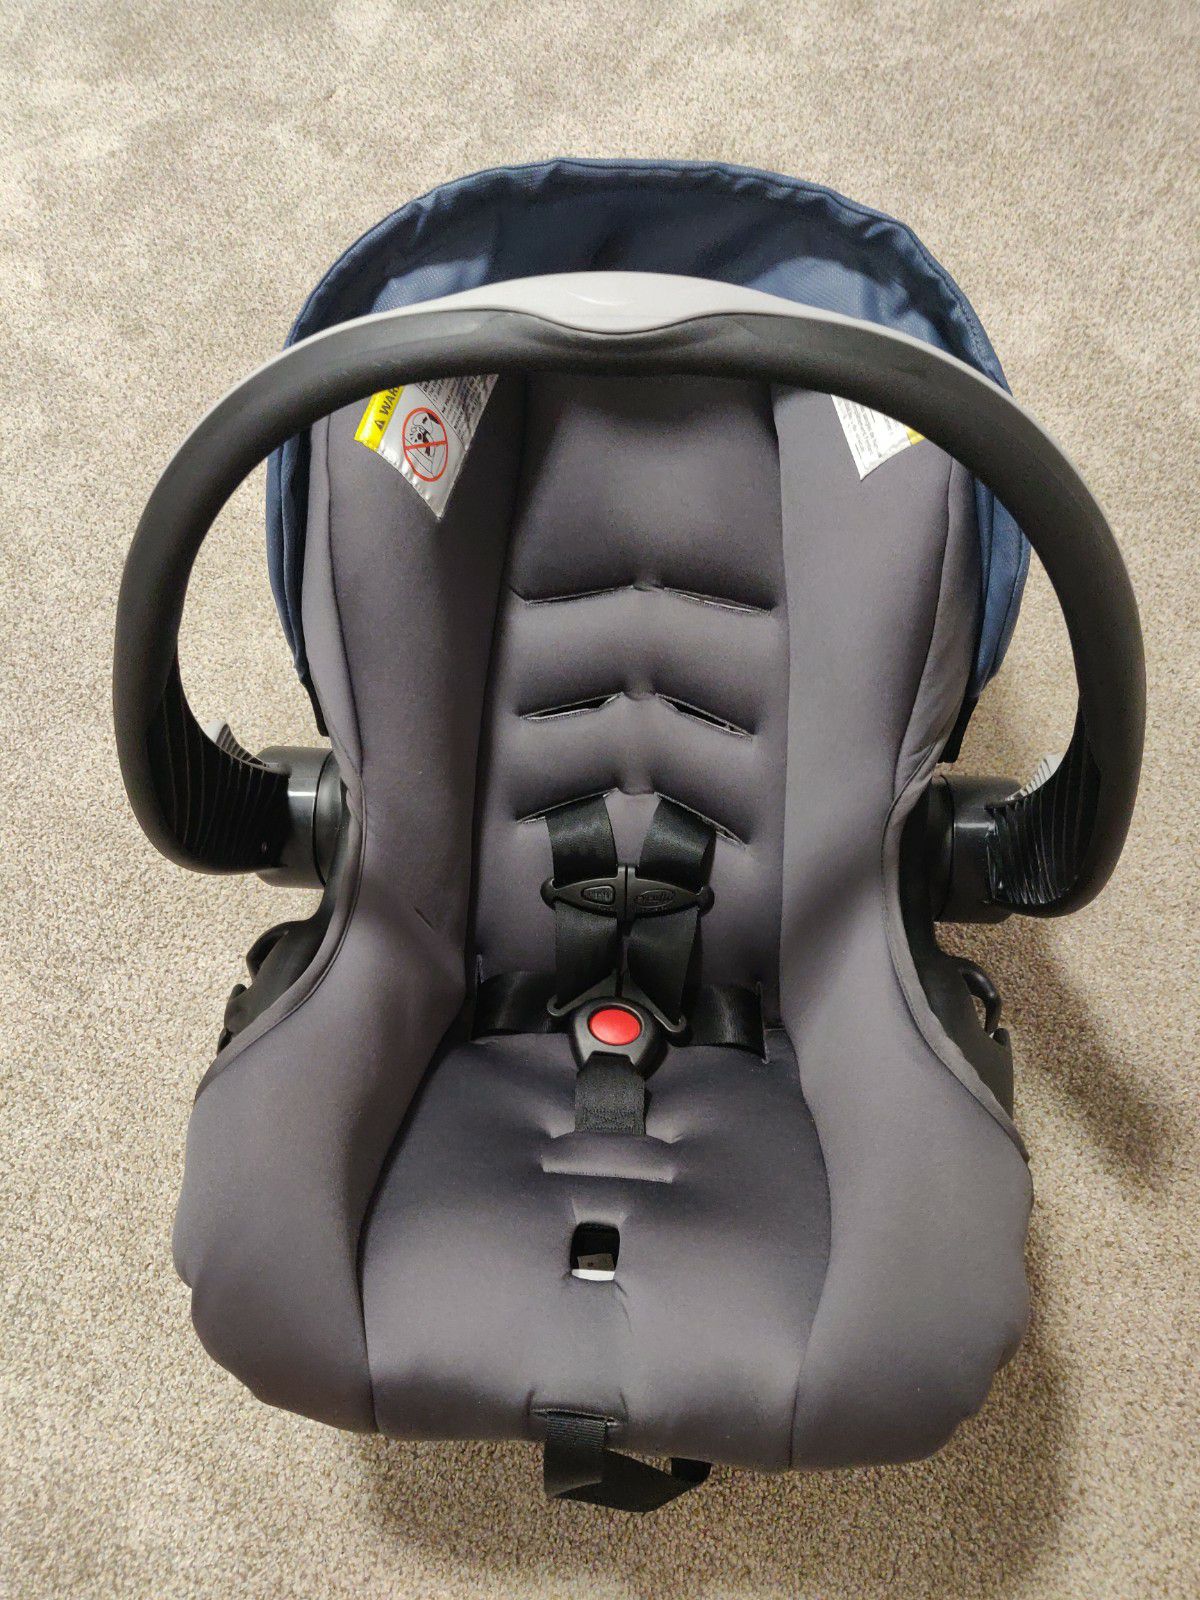 Evenflo car seat in good condition normal wear and tear